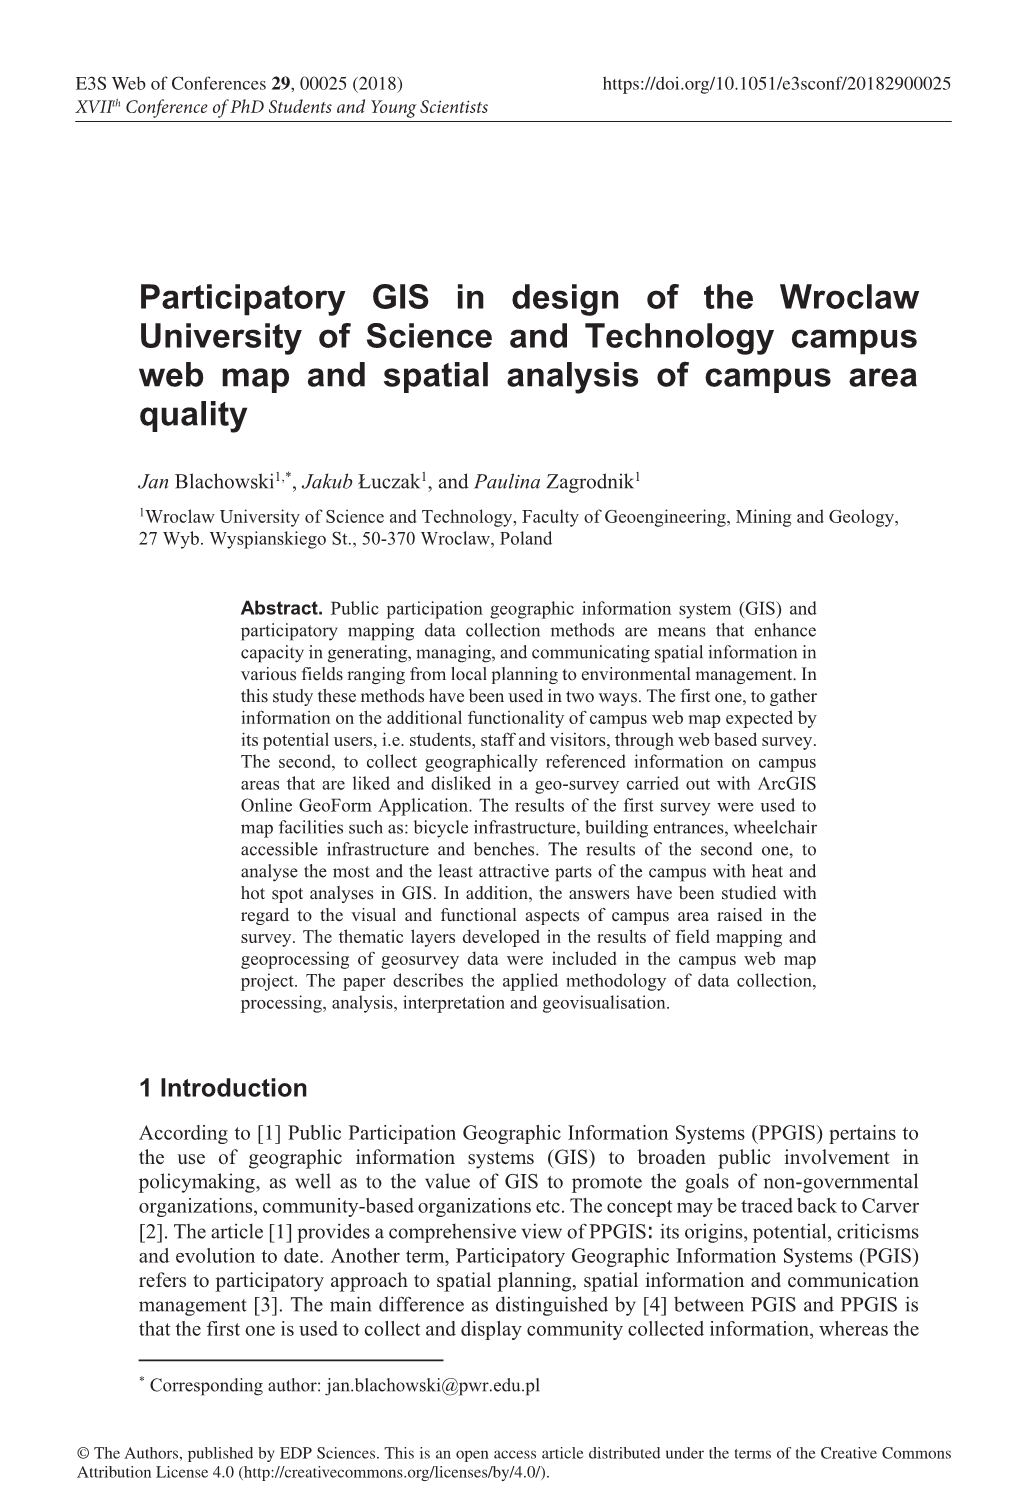 Participatory GIS in Design of the Wroclaw University of Science and Technology Campus Web Map and Spatial Analysis of Campus Area Quality